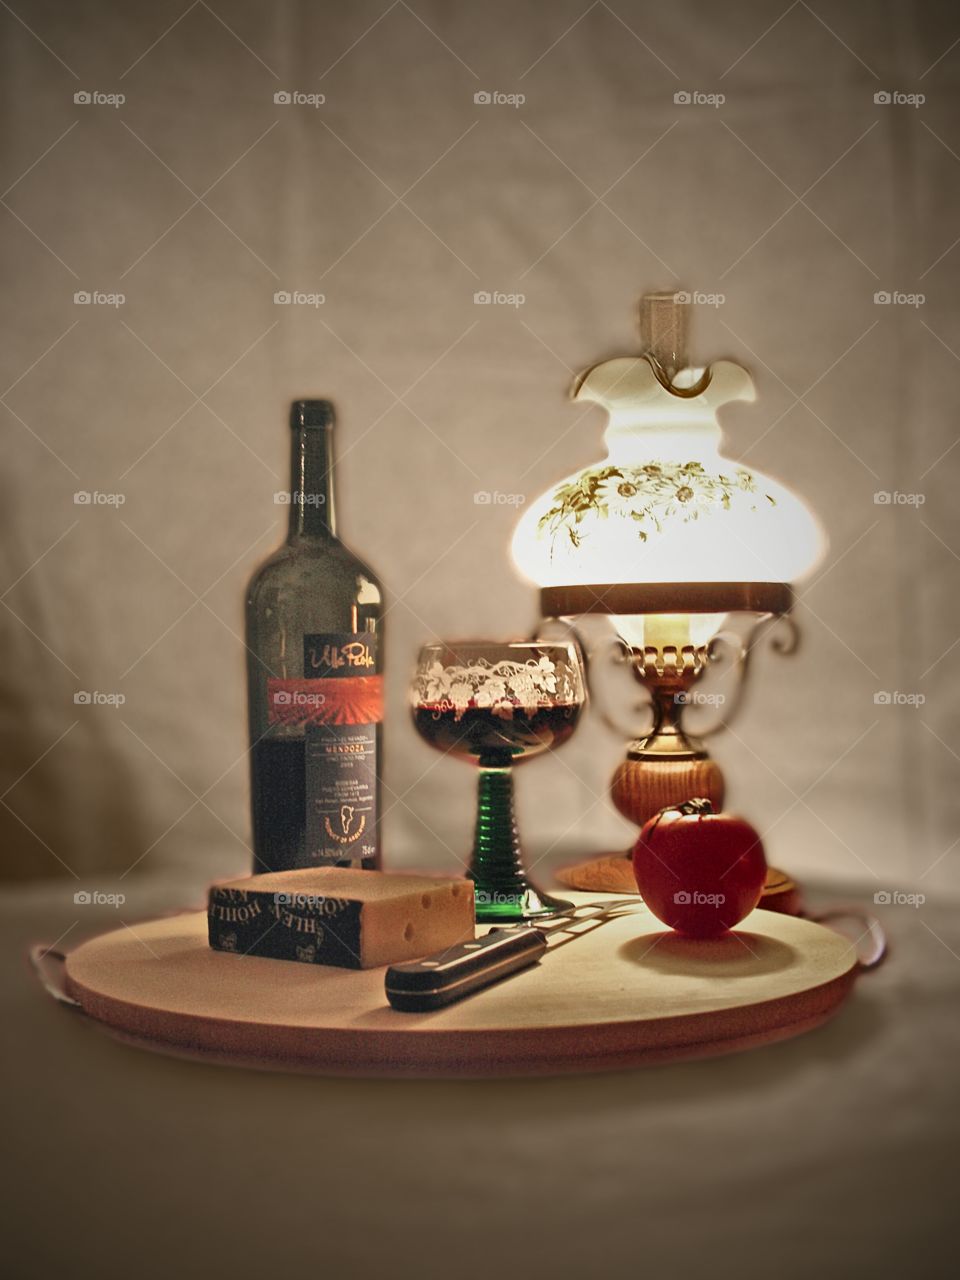 cheese ˋn vine. stil life of bottle vine with chees, tomato and old fashioned lamp